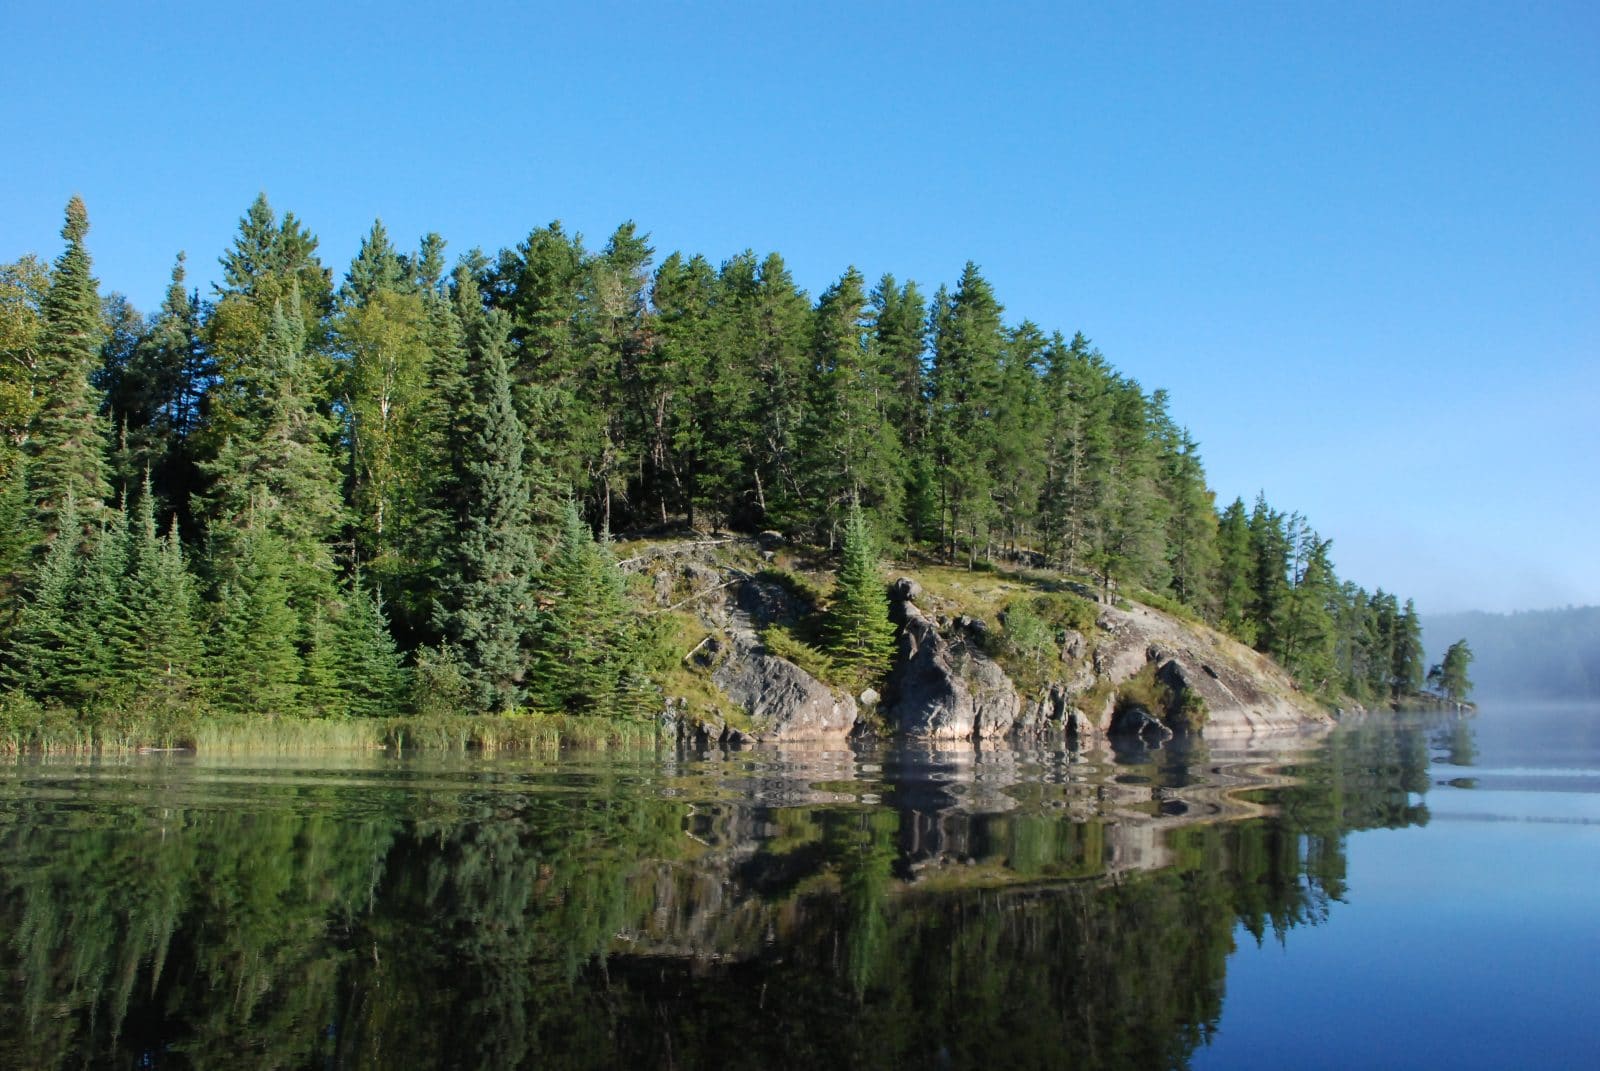 A large still body of water reflects a rocky shore and evergreen trees.